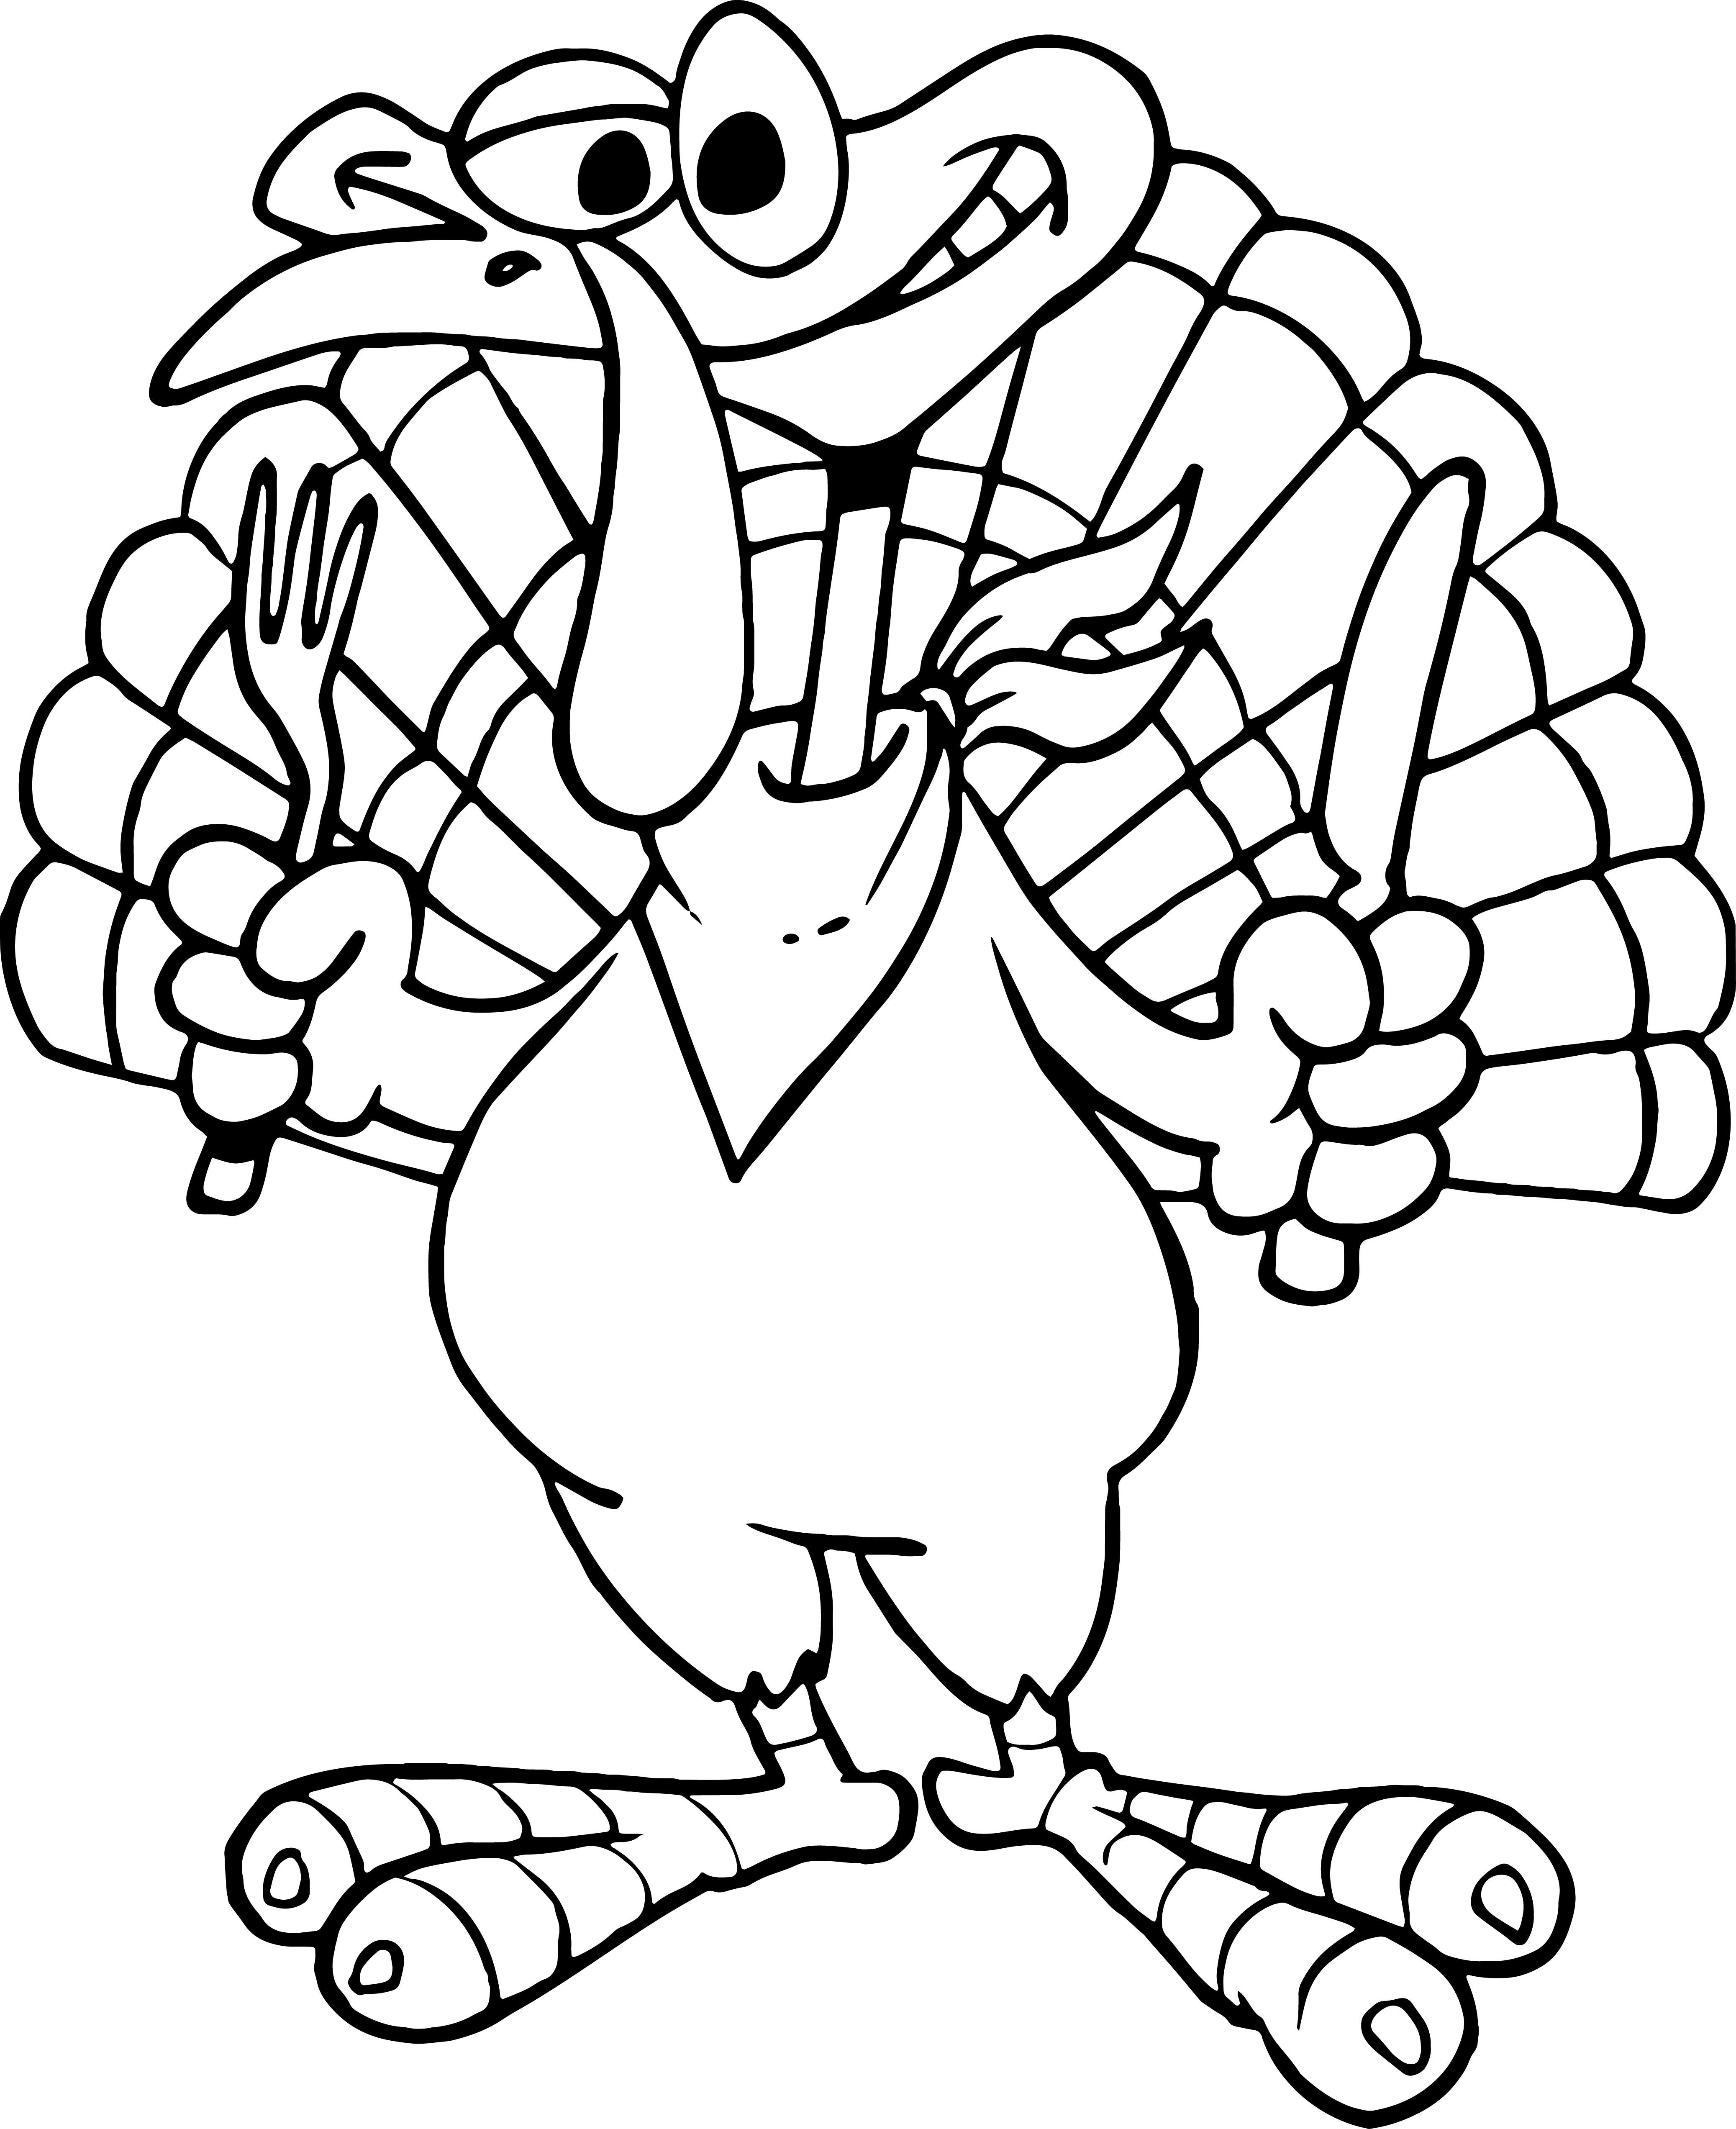 Madeline Coloring Pages Printable Coloring Pages Thanksgiving Coloring Pages Court Of Thorns And